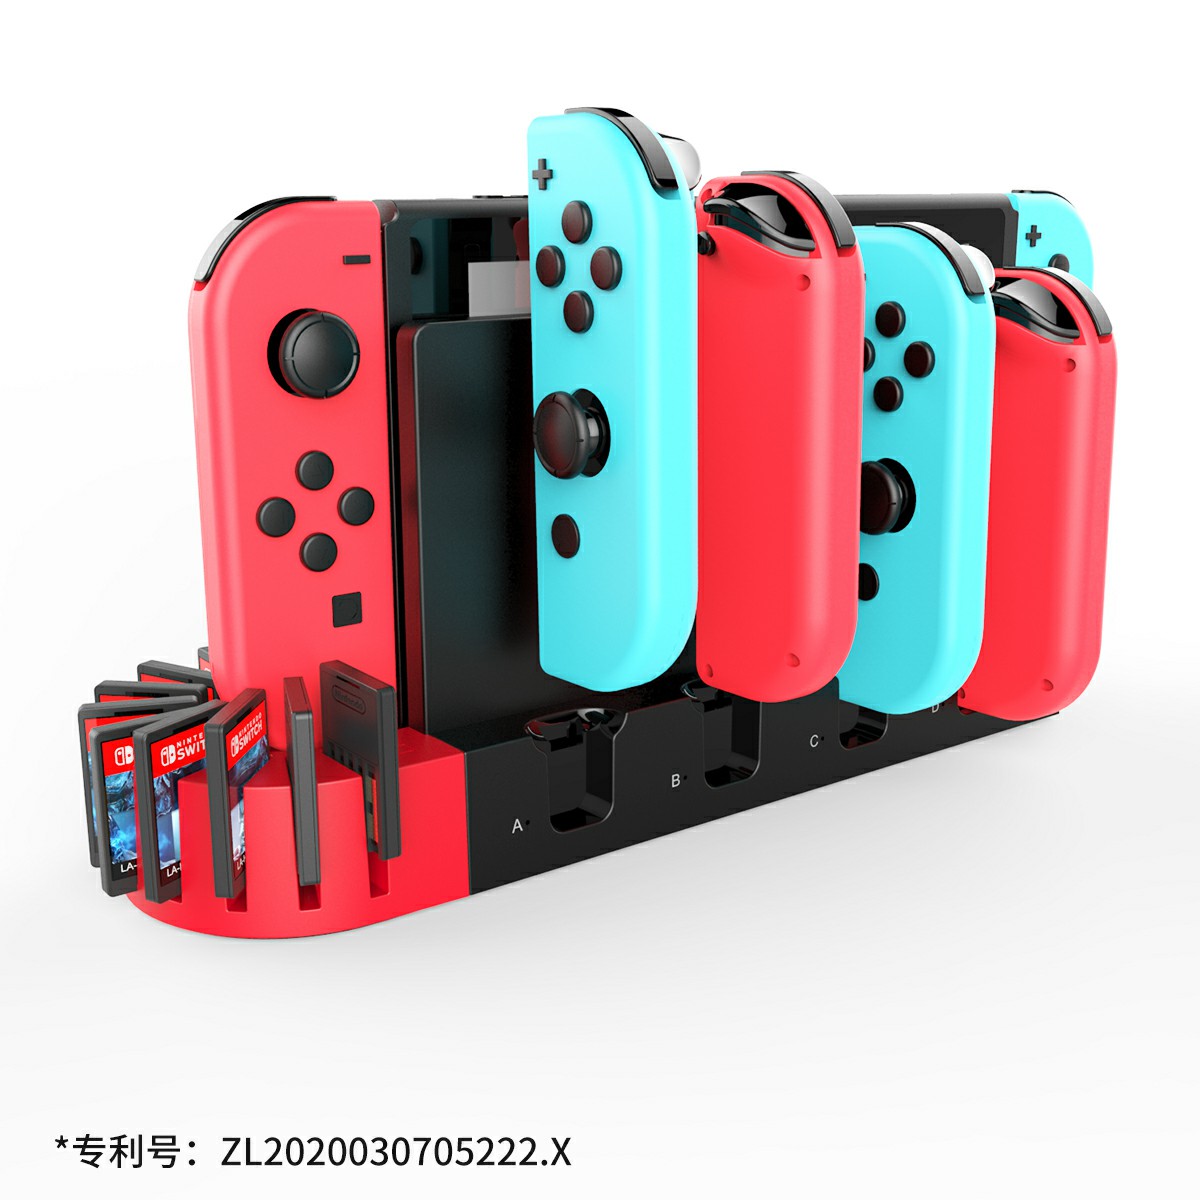  PG-SW071 joycon four-charger charging stand